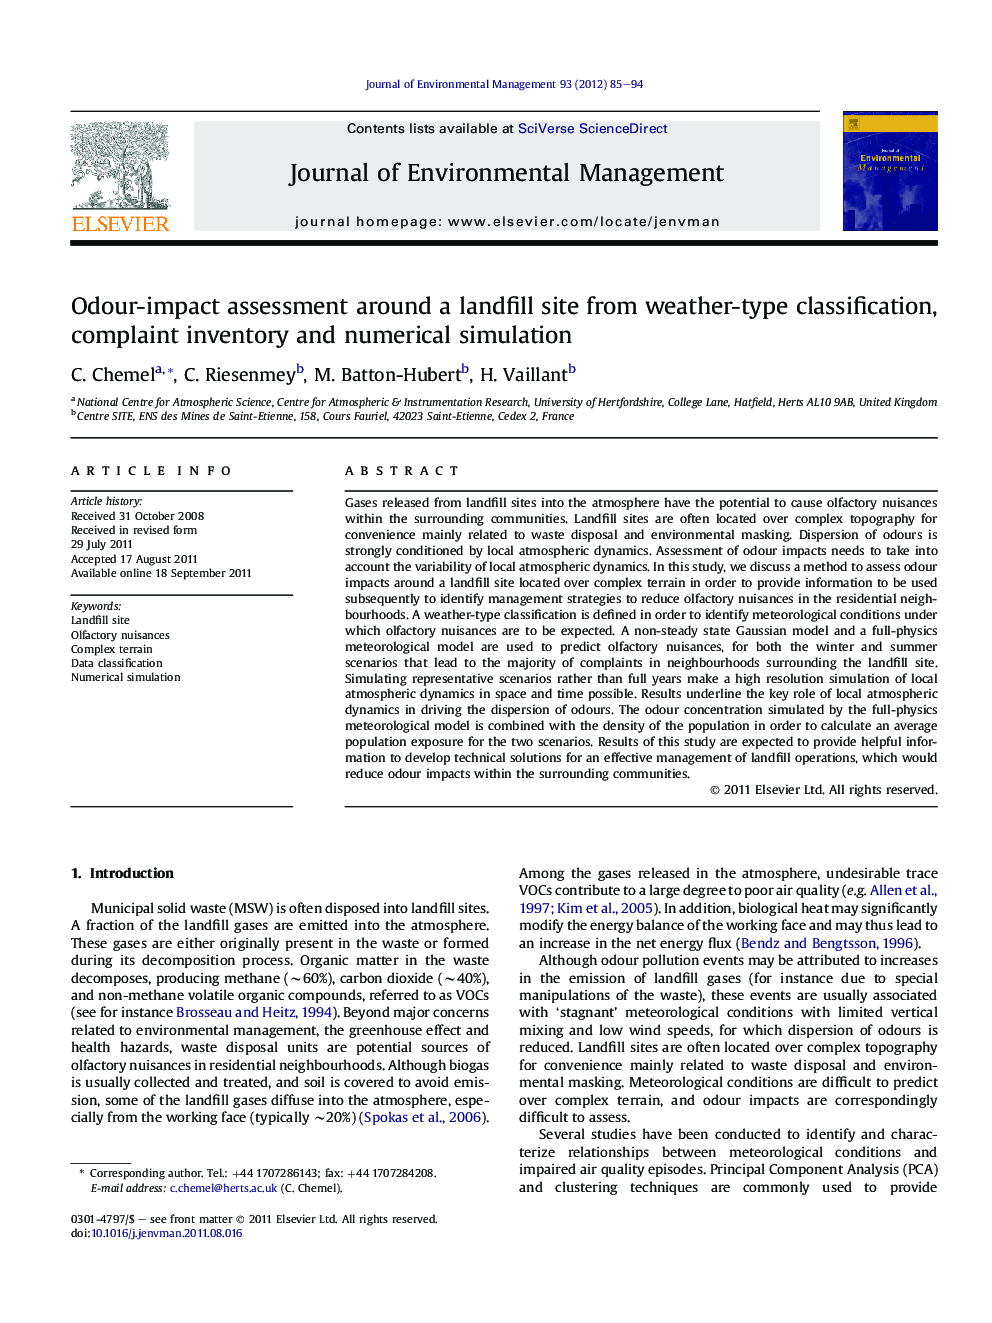 Odour-impact assessment around a landfill site from weather-type classification, complaint inventory and numerical simulation